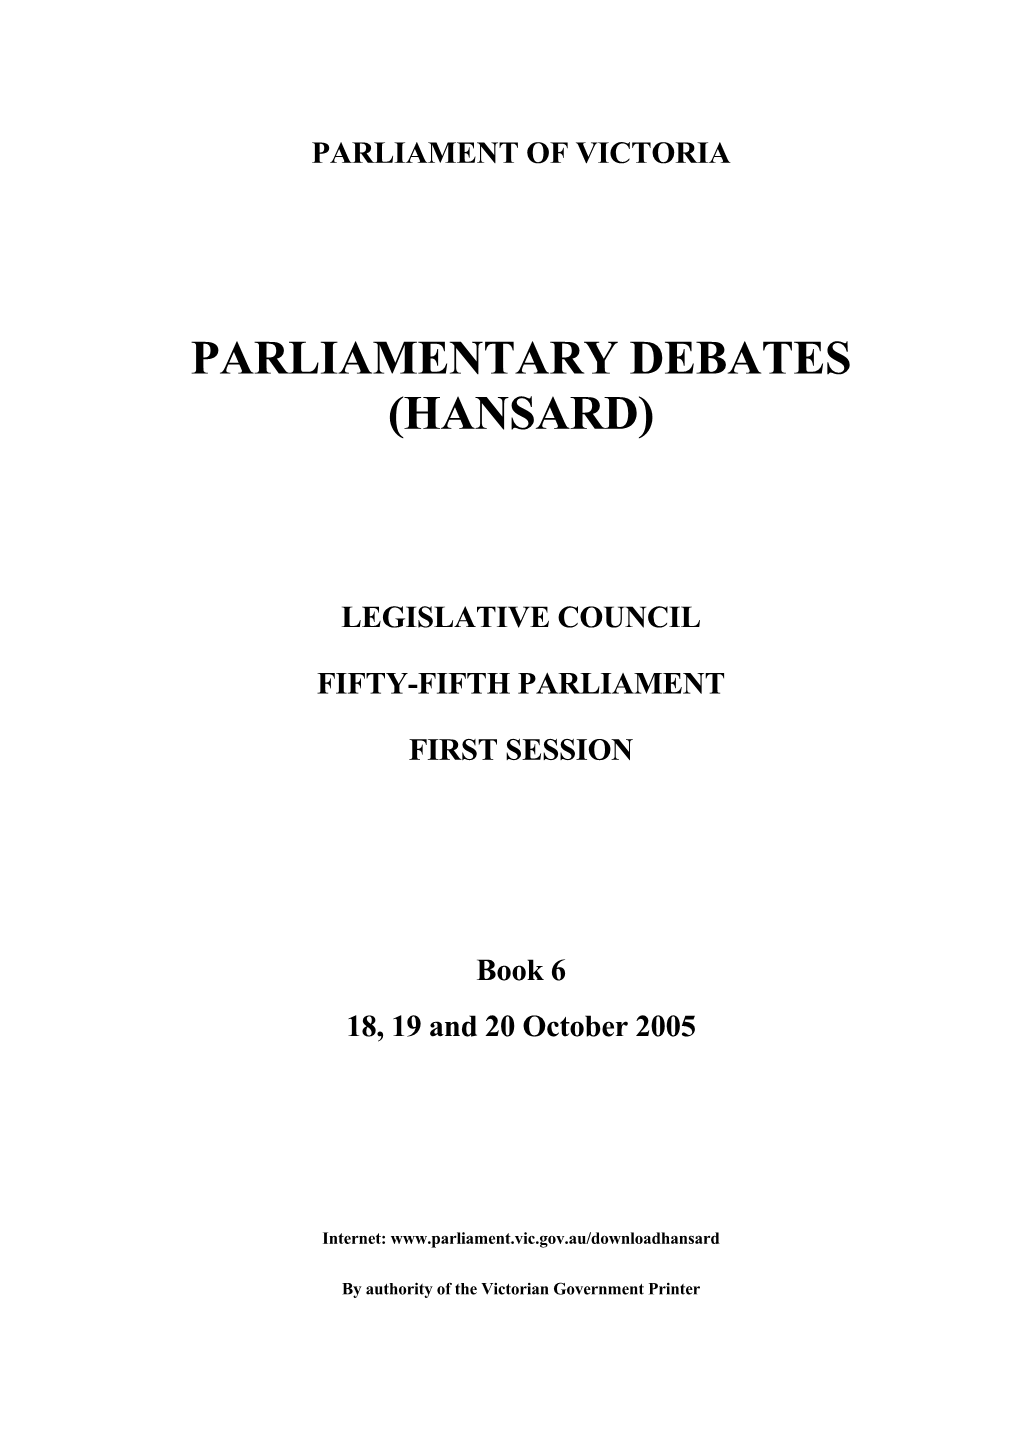 Book 6 18, 19 and 20 October 2005